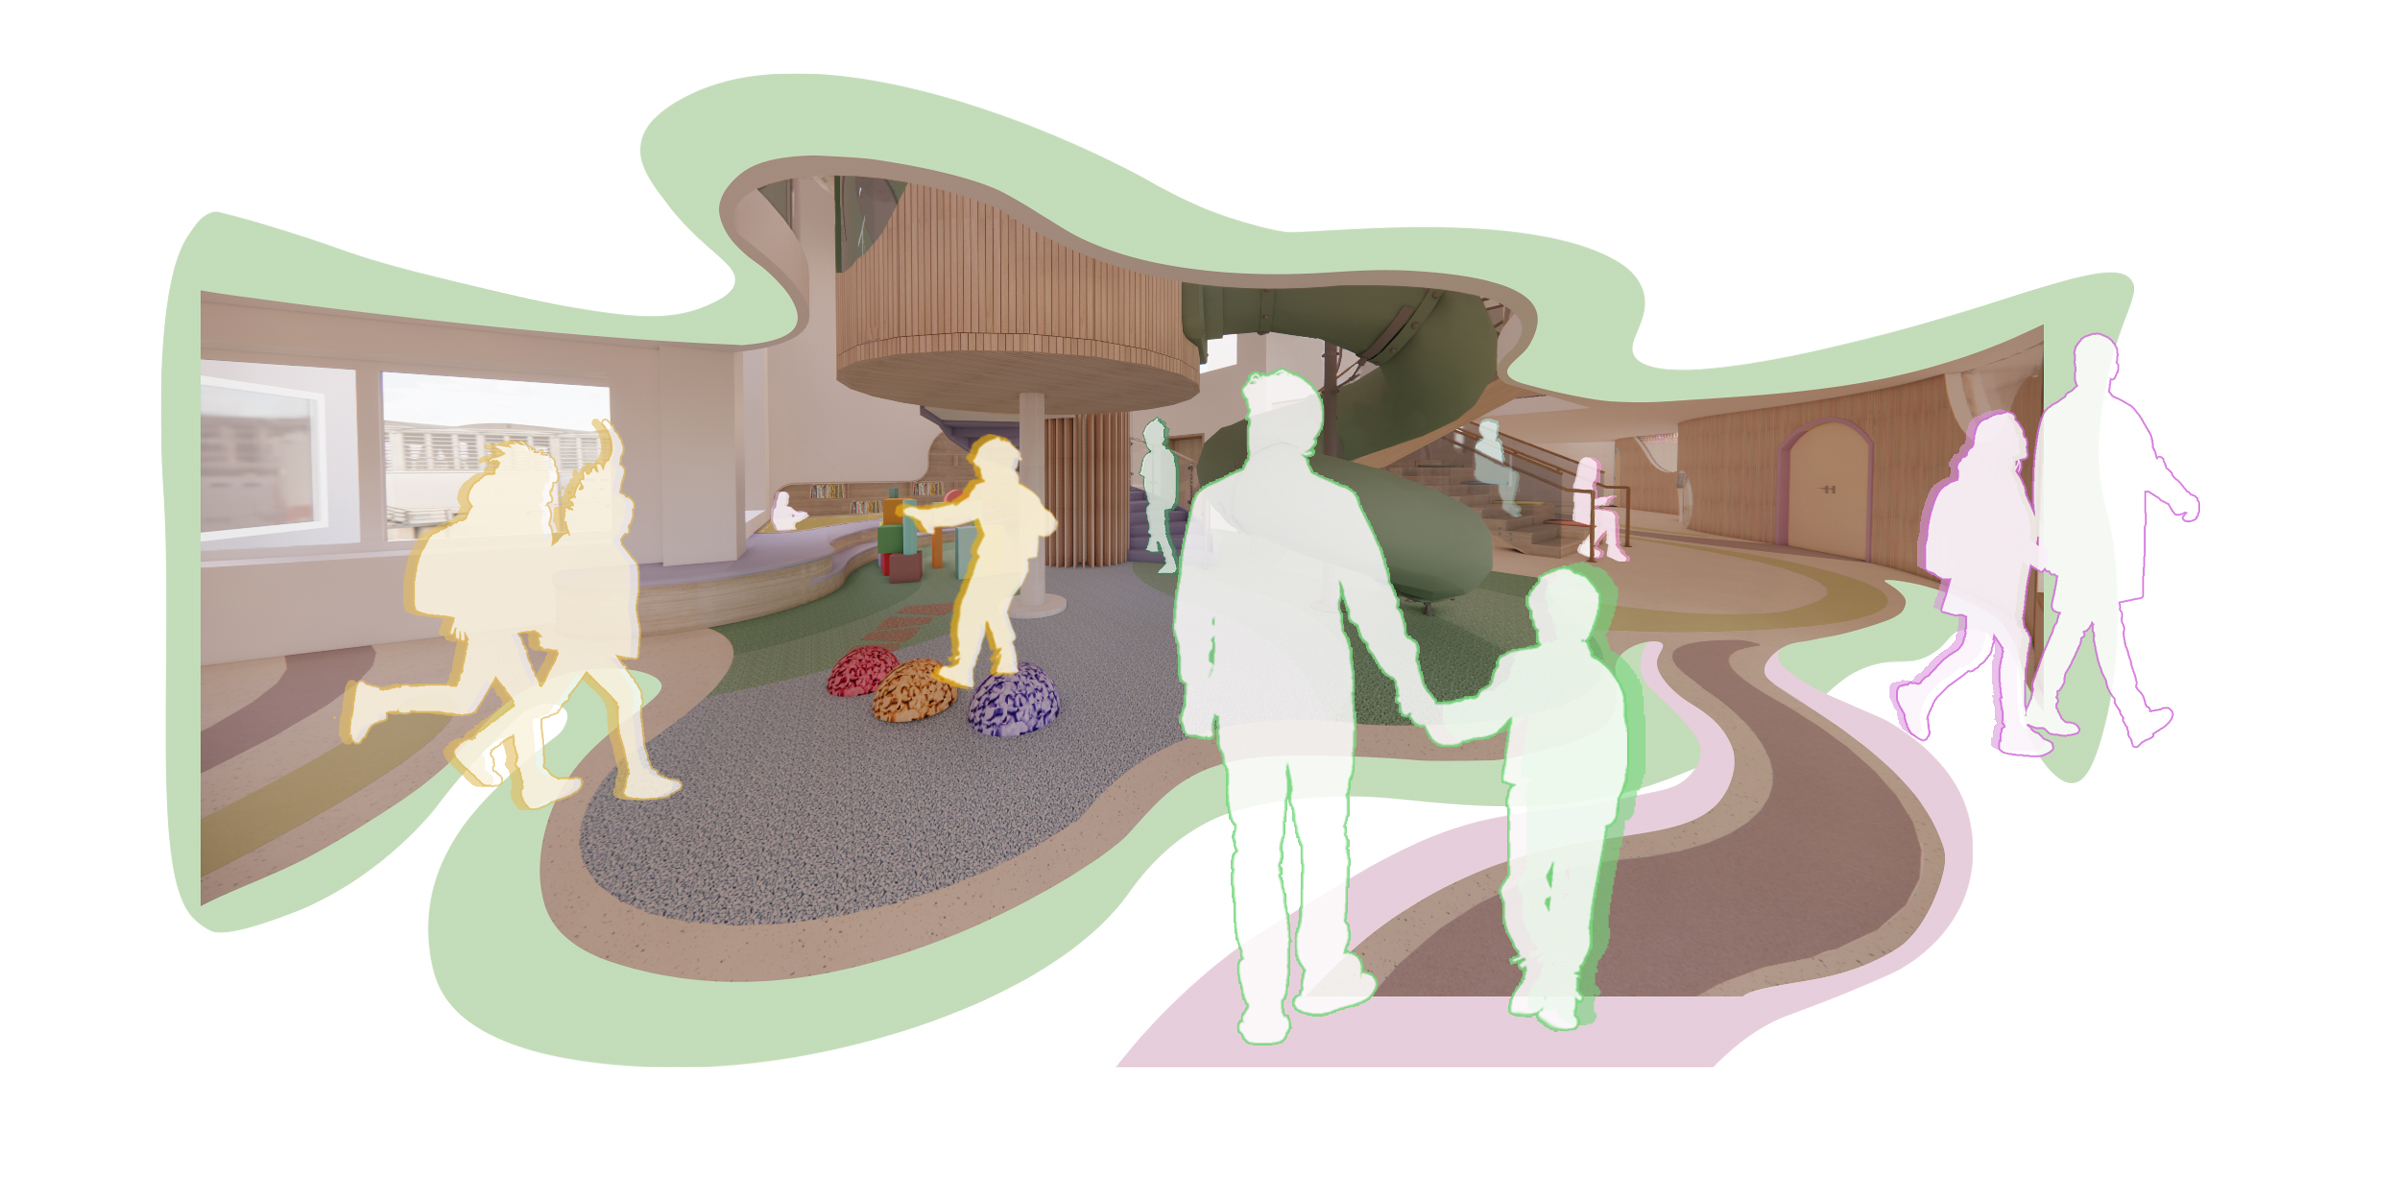 Visual render by Nada Abu-Seido showing an indoor play area. Walls and space has curved and organic shapes.